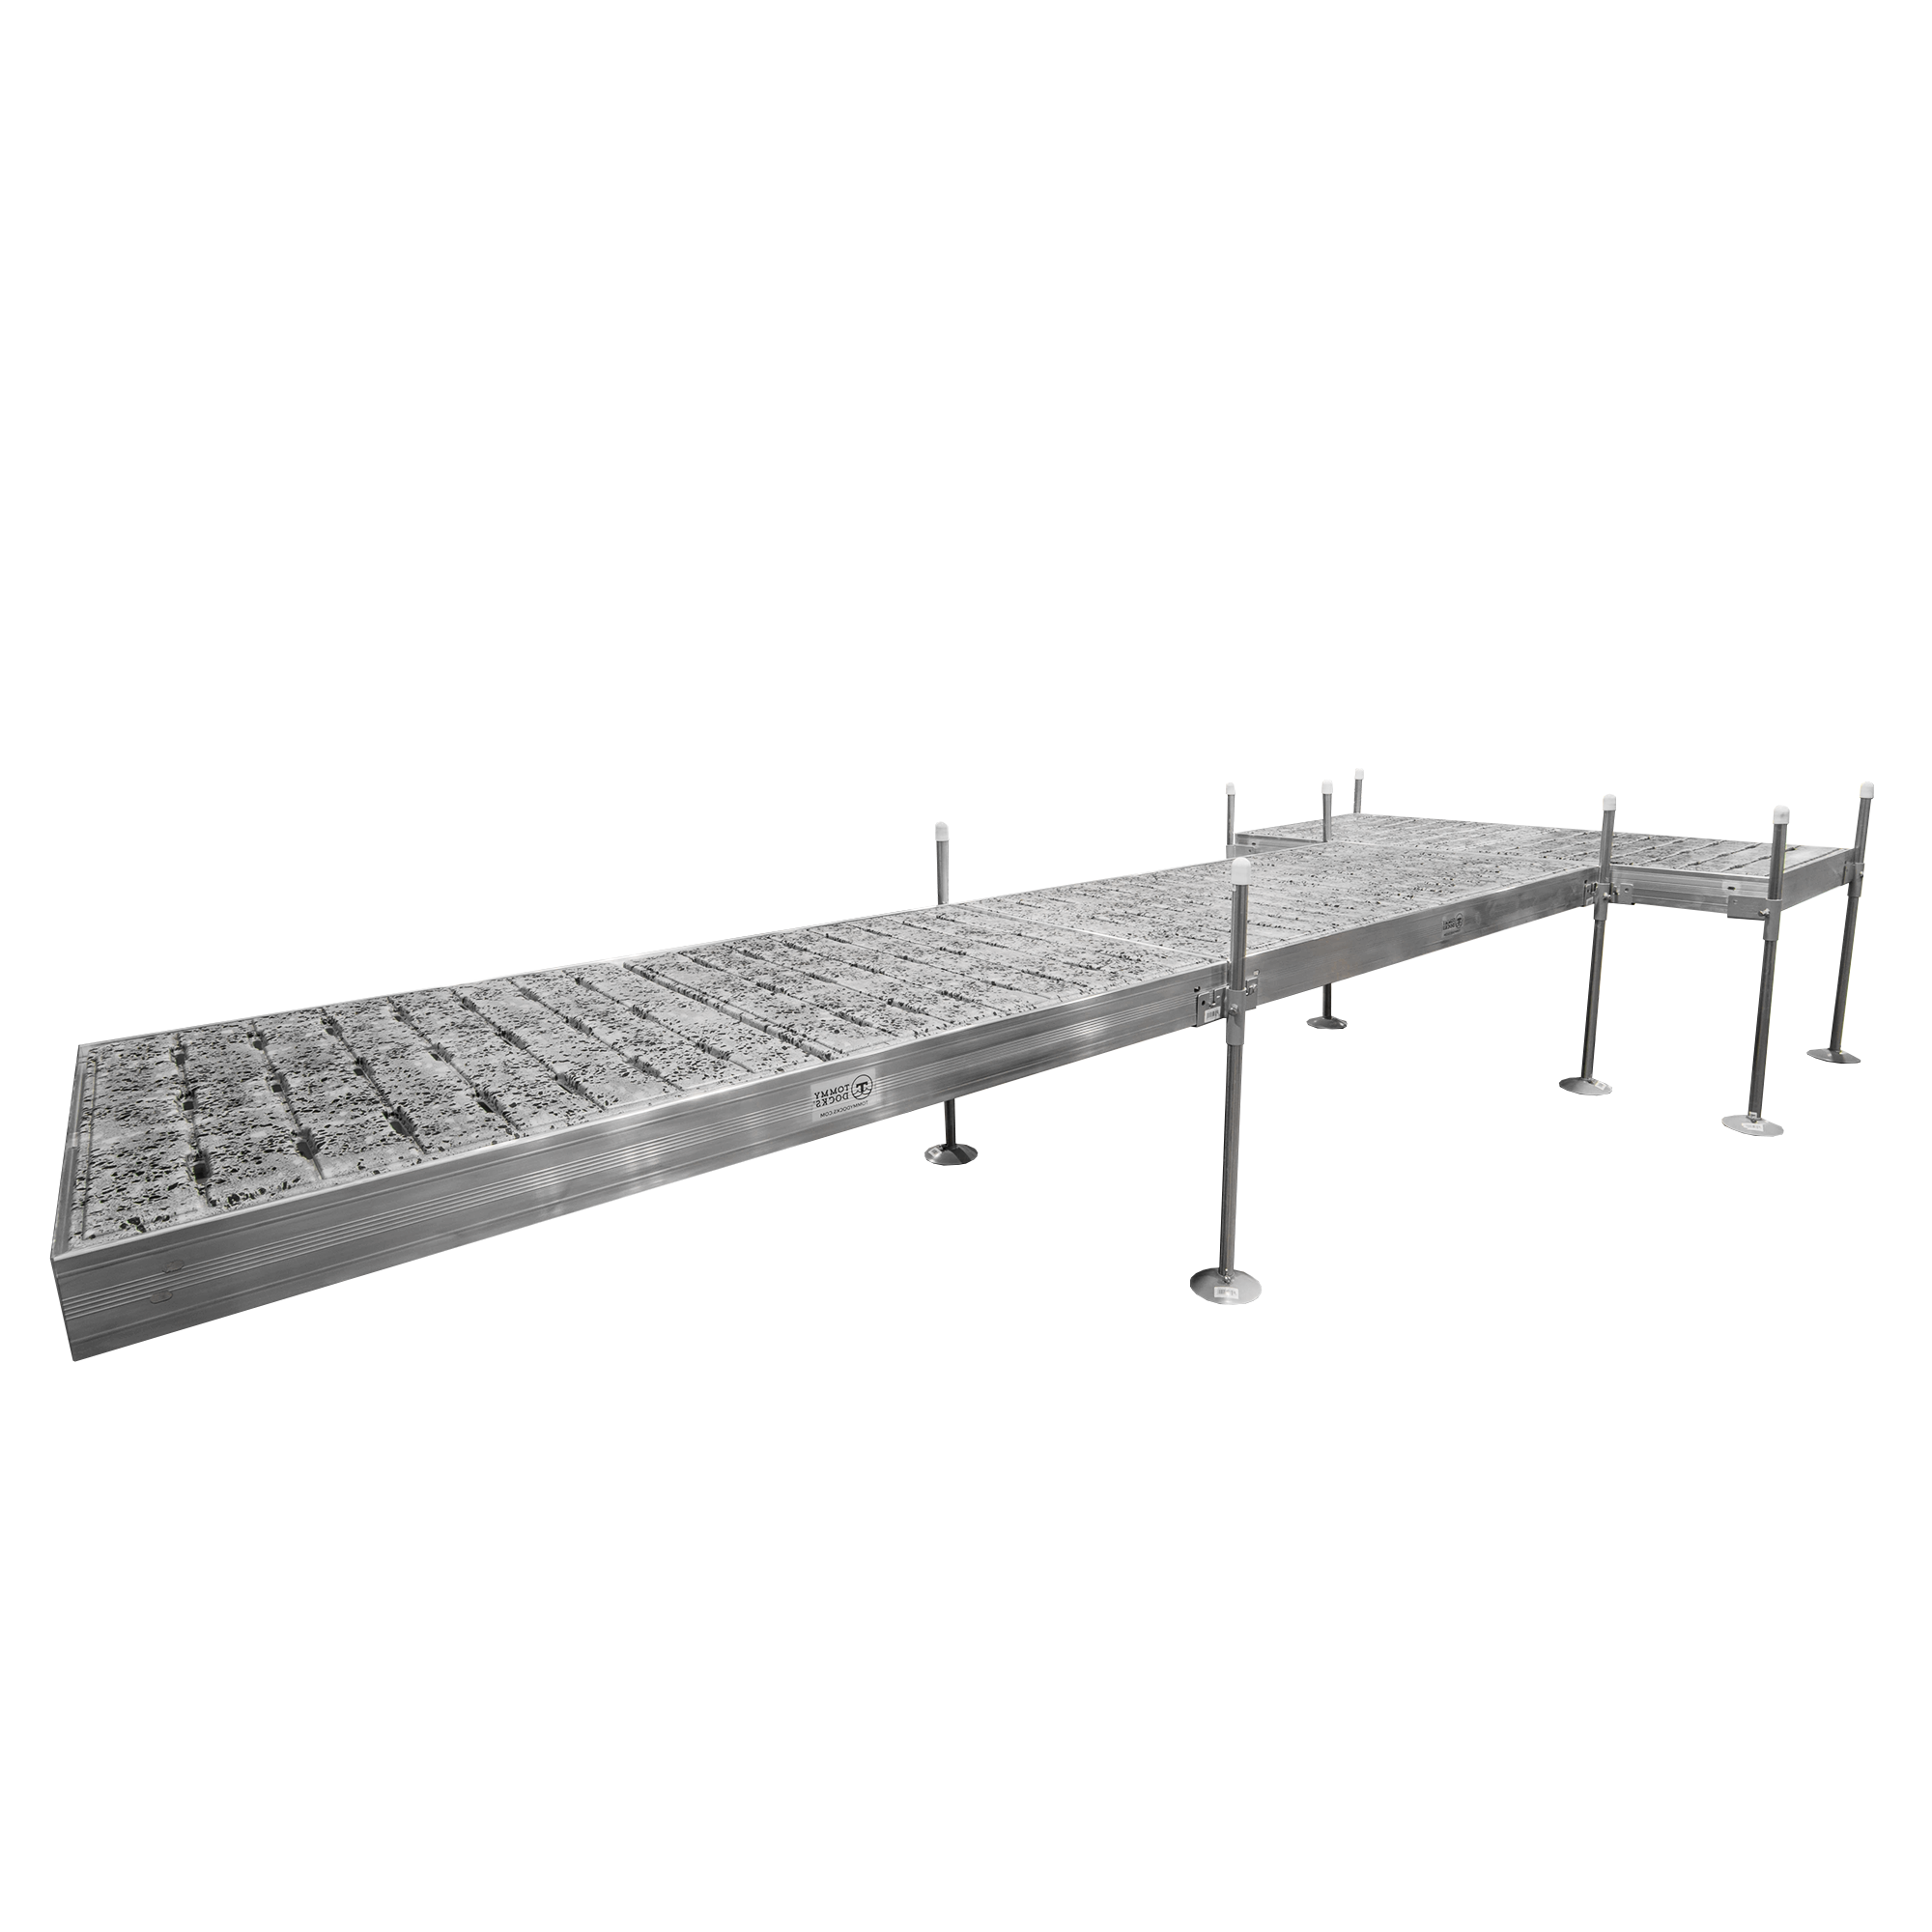 20' T-Shaped Boat Dock System with Aluminum Frame and Thermoformed Terrazzo Decking